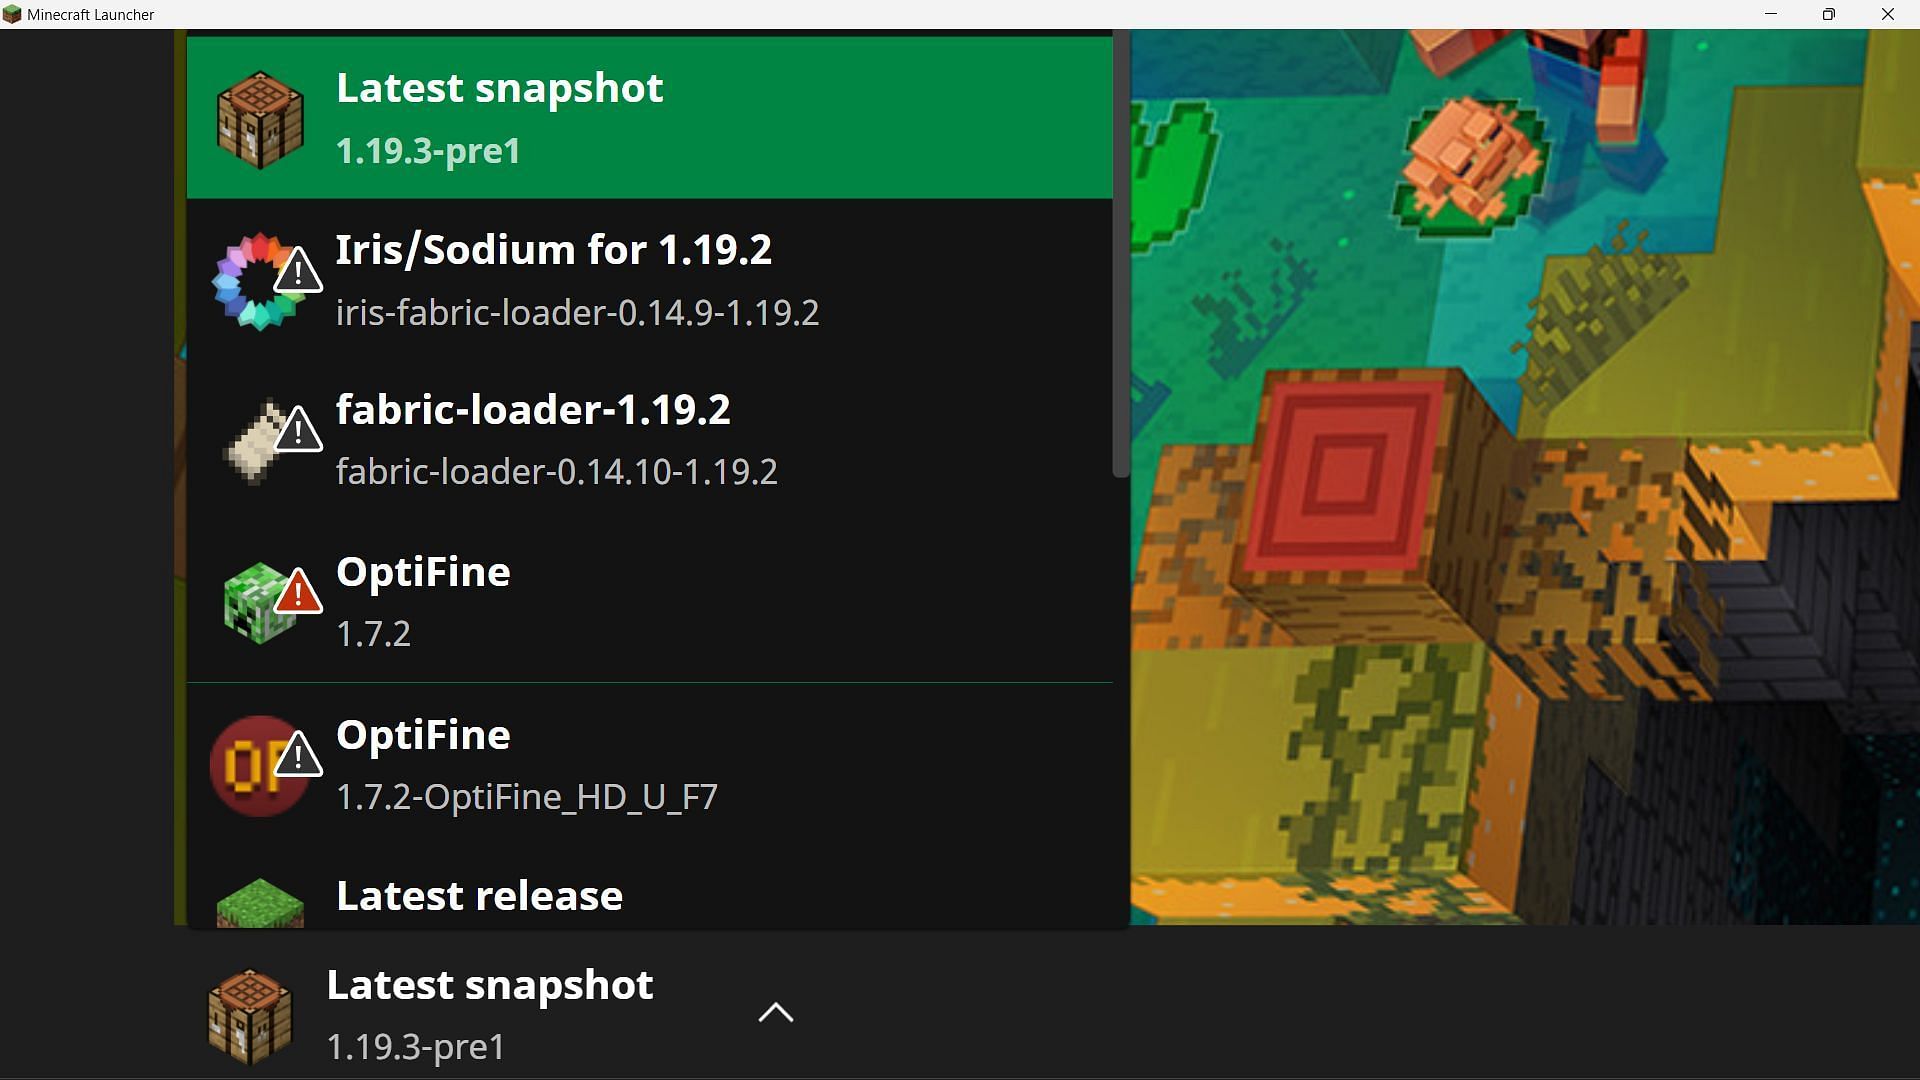 Although the Minecraft version will be read as a 'snapshot' it will be a pre-release (Image via Sportskeeda)